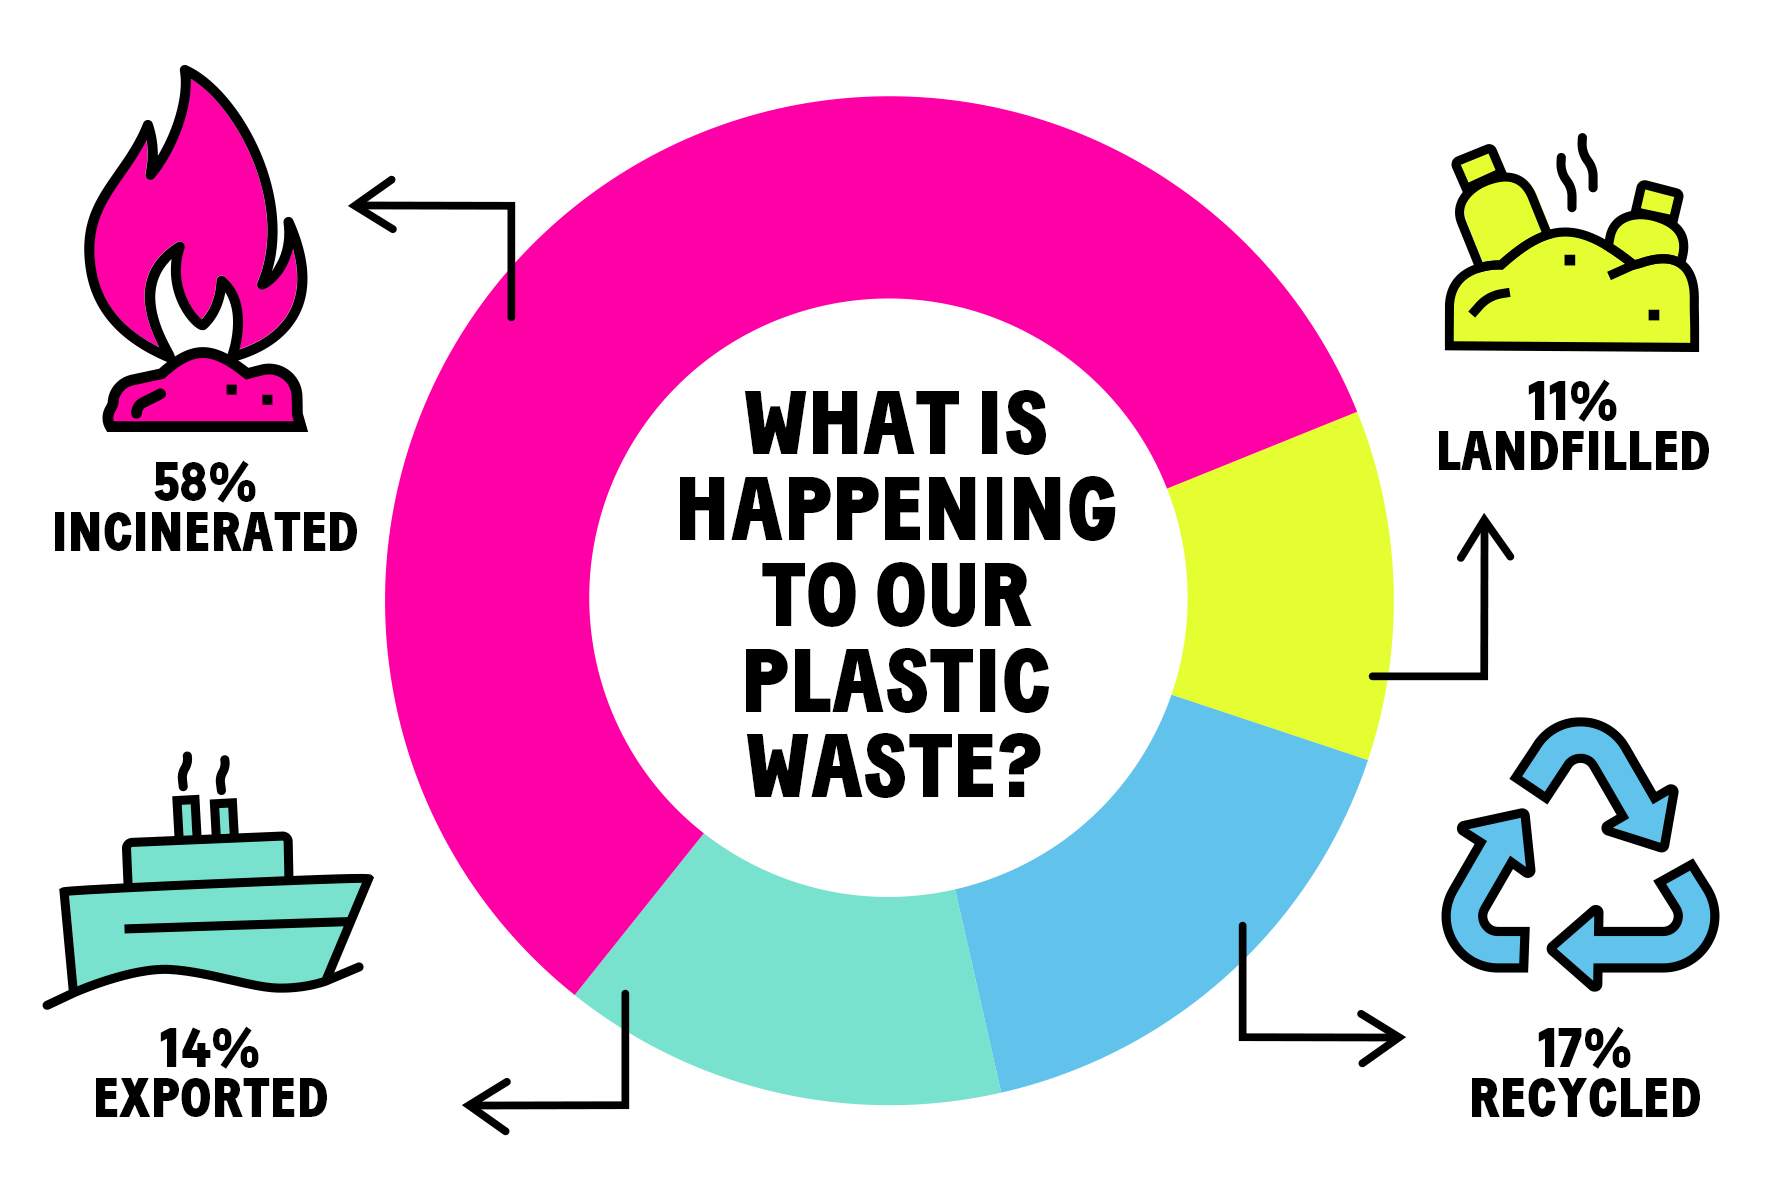 What is happening to our plastic waste? 58% incinerated, 11% landfill, 14% exported, 17% recycled